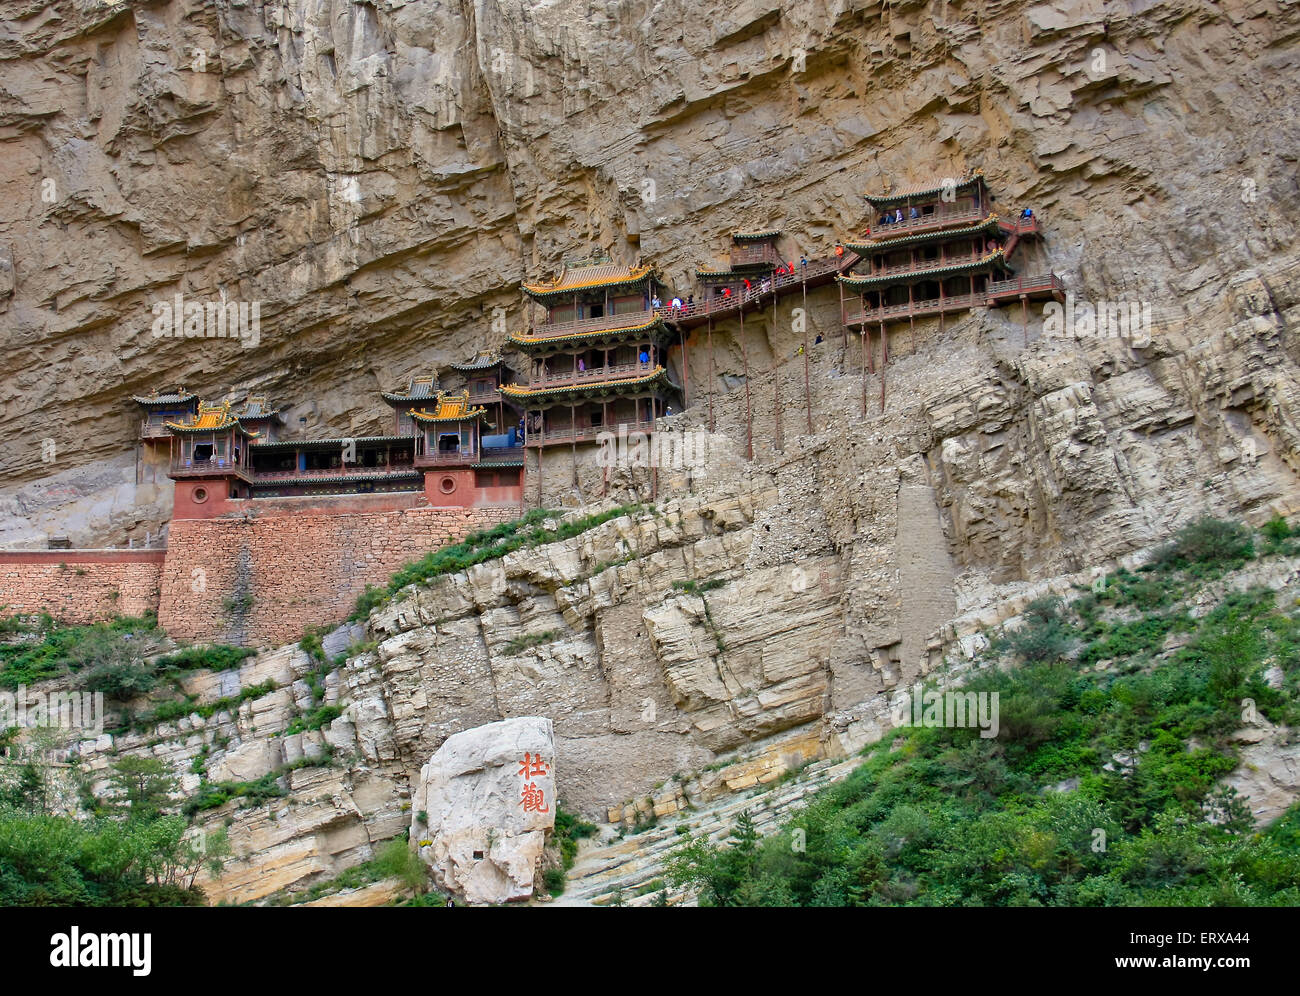 Unusual architectural structure - hanging monastery Stock Photo